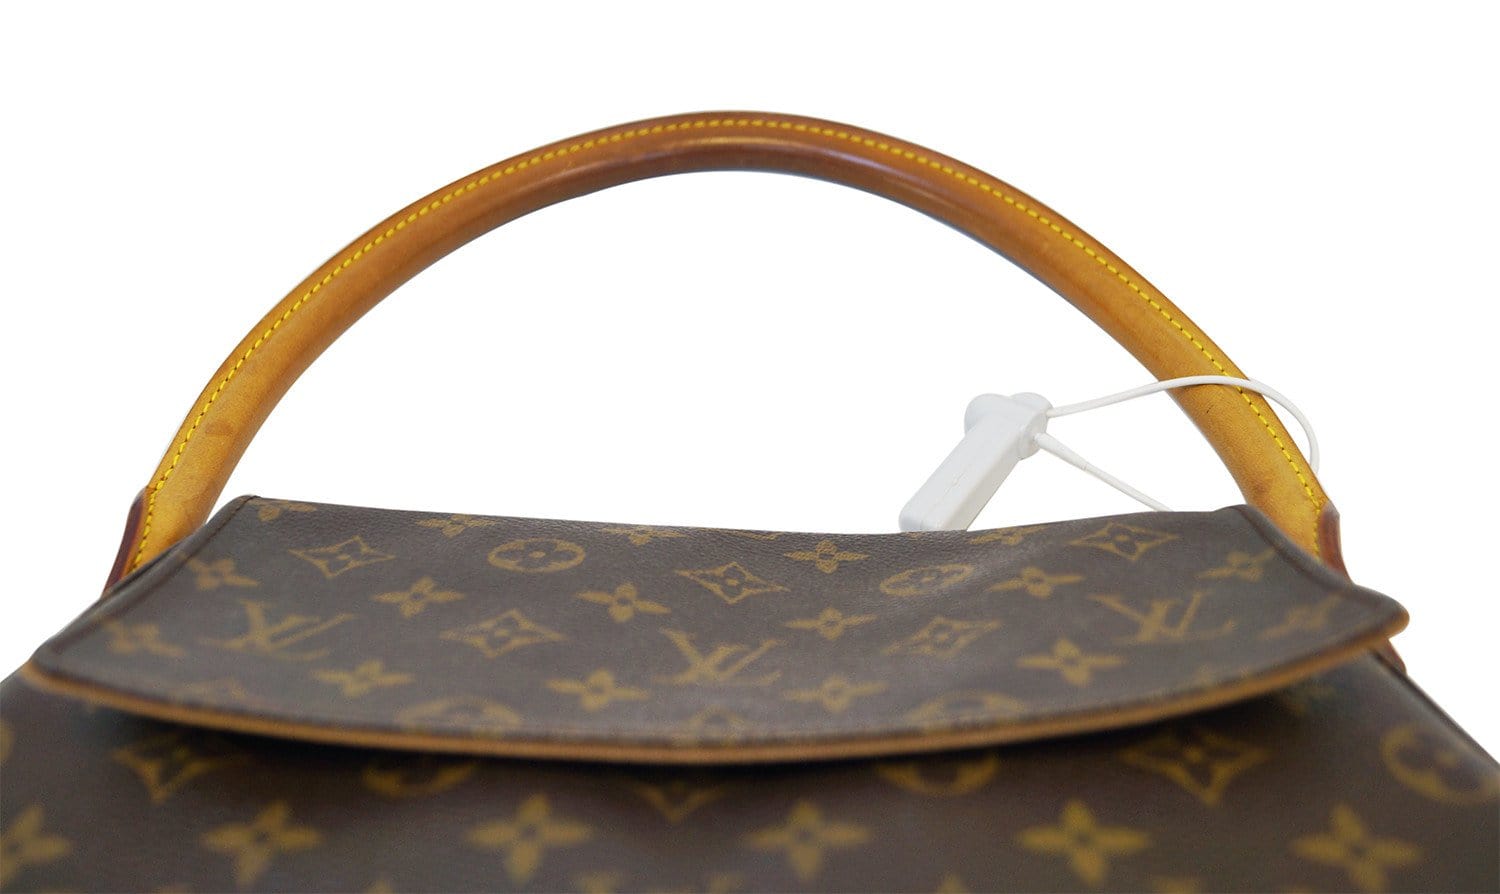 With this extender it is now a mini shoulder bag! #louisvuitton